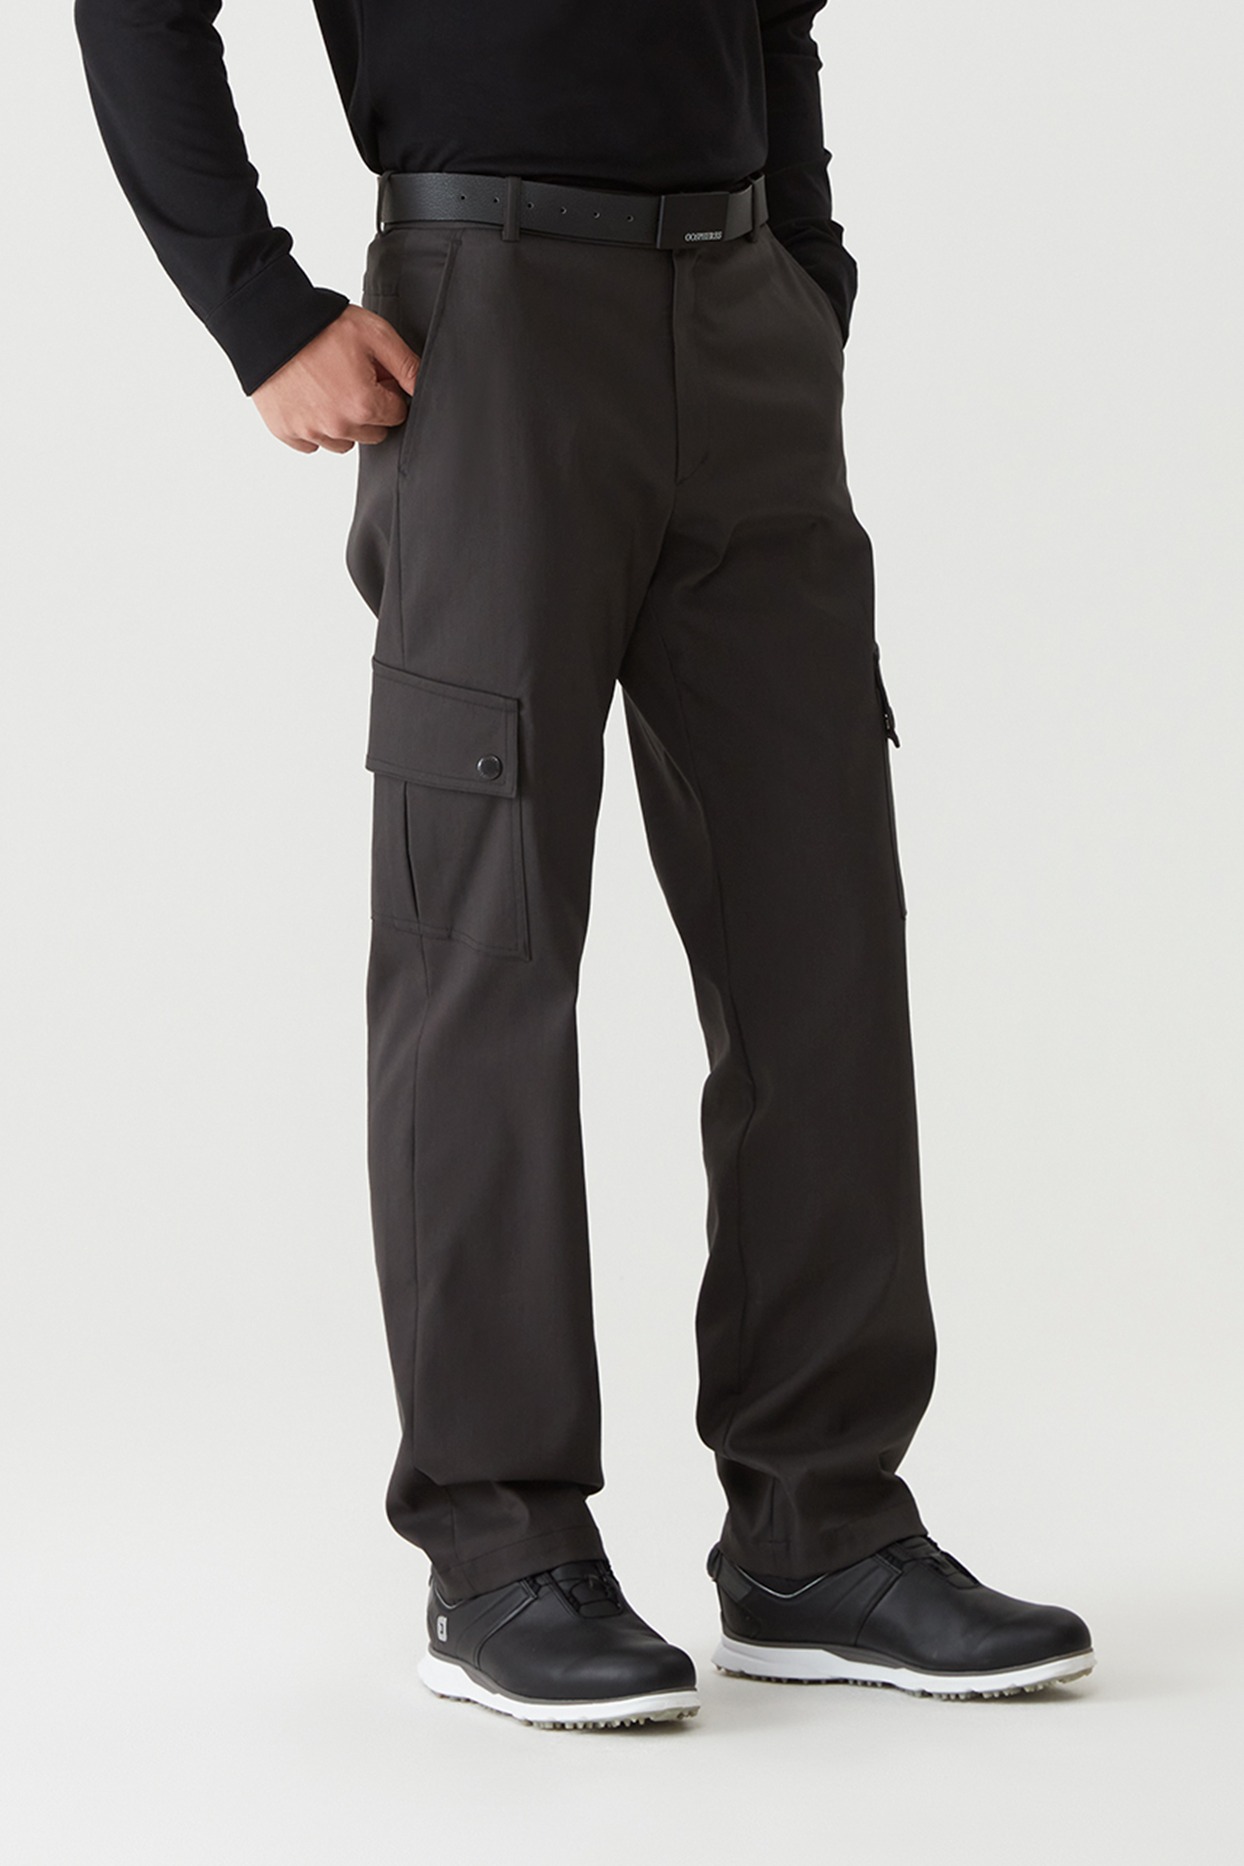 M CARGO SIDE DETAIL PANTS CHARCOAL